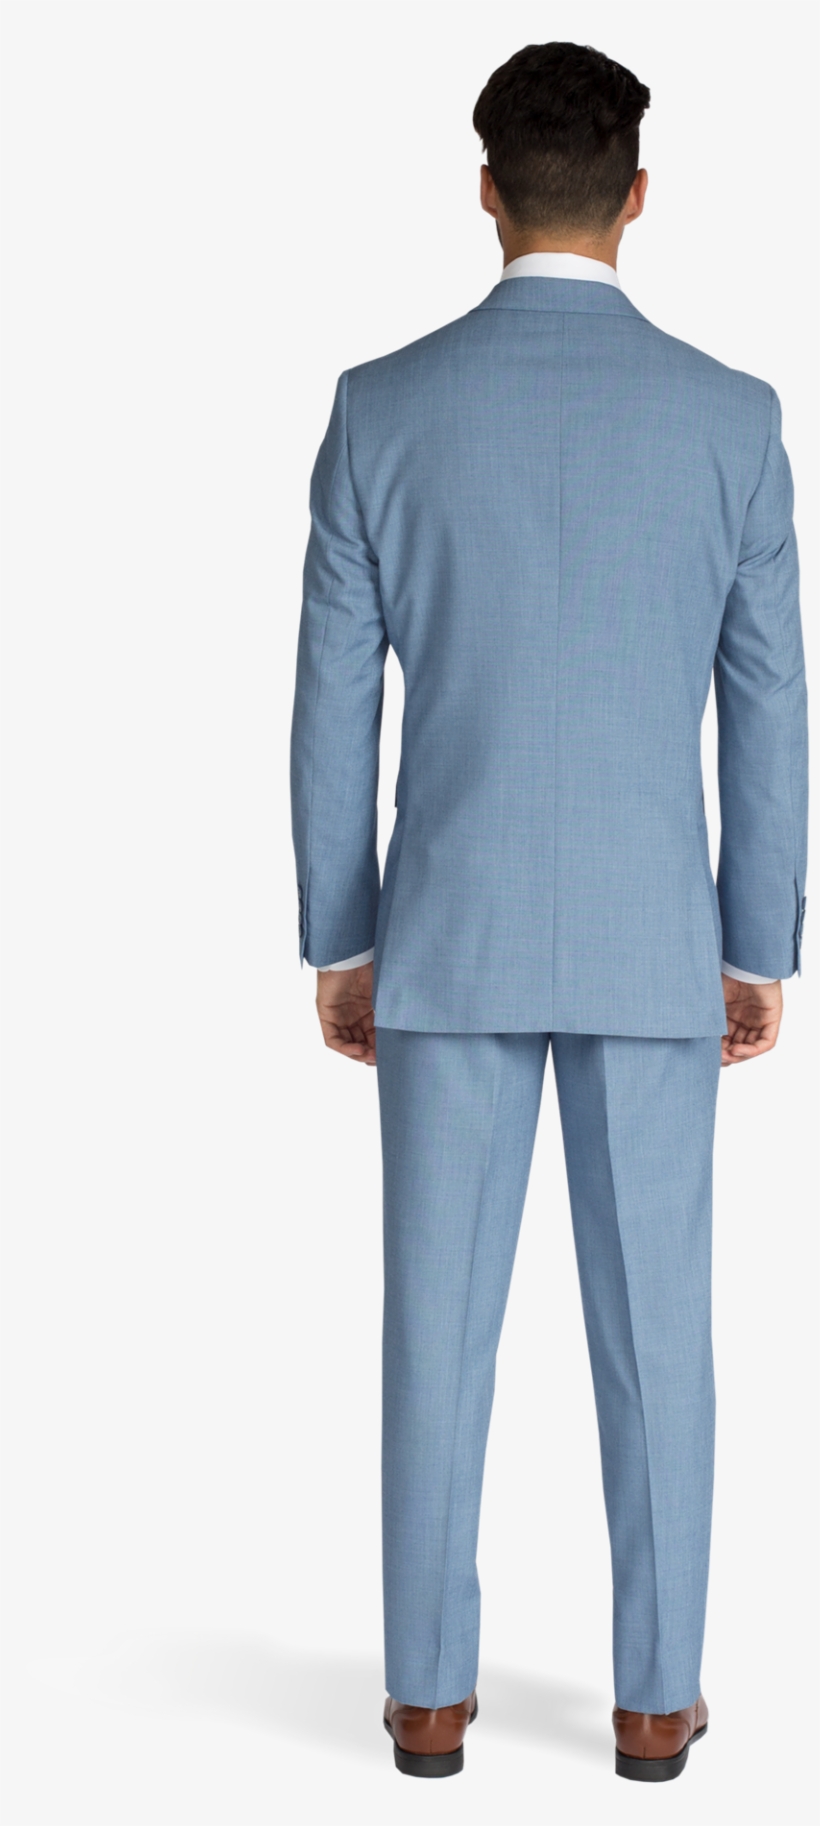 Light Blue Suit Back View - Back View Of Man In Suit, transparent png #7792829